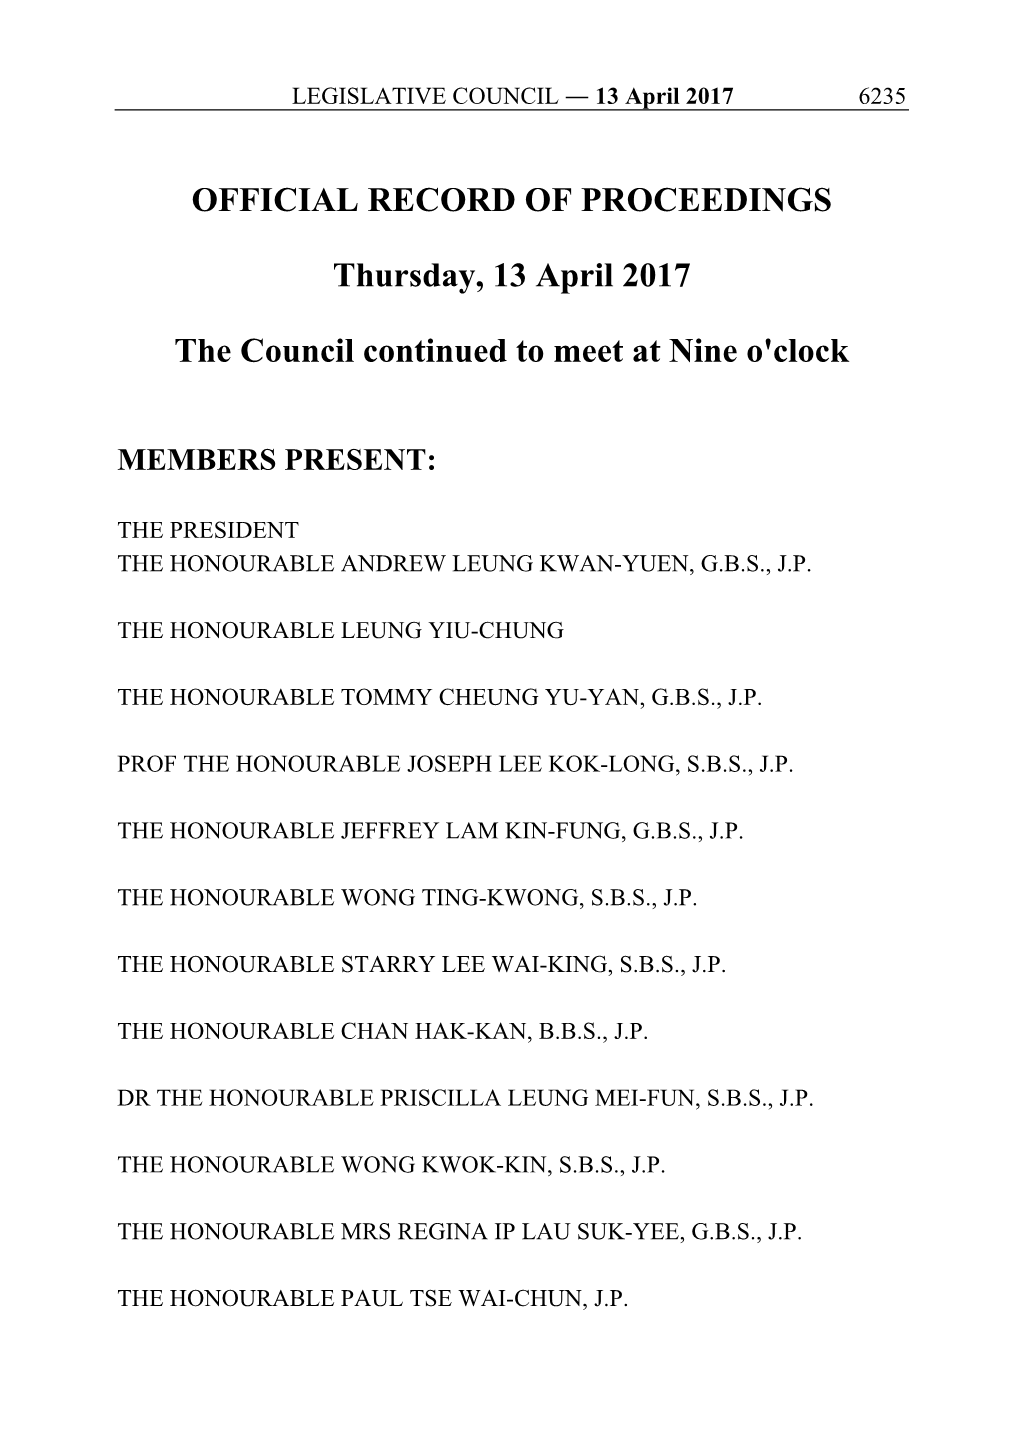 OFFICIAL RECORD of PROCEEDINGS Thursday, 13 April